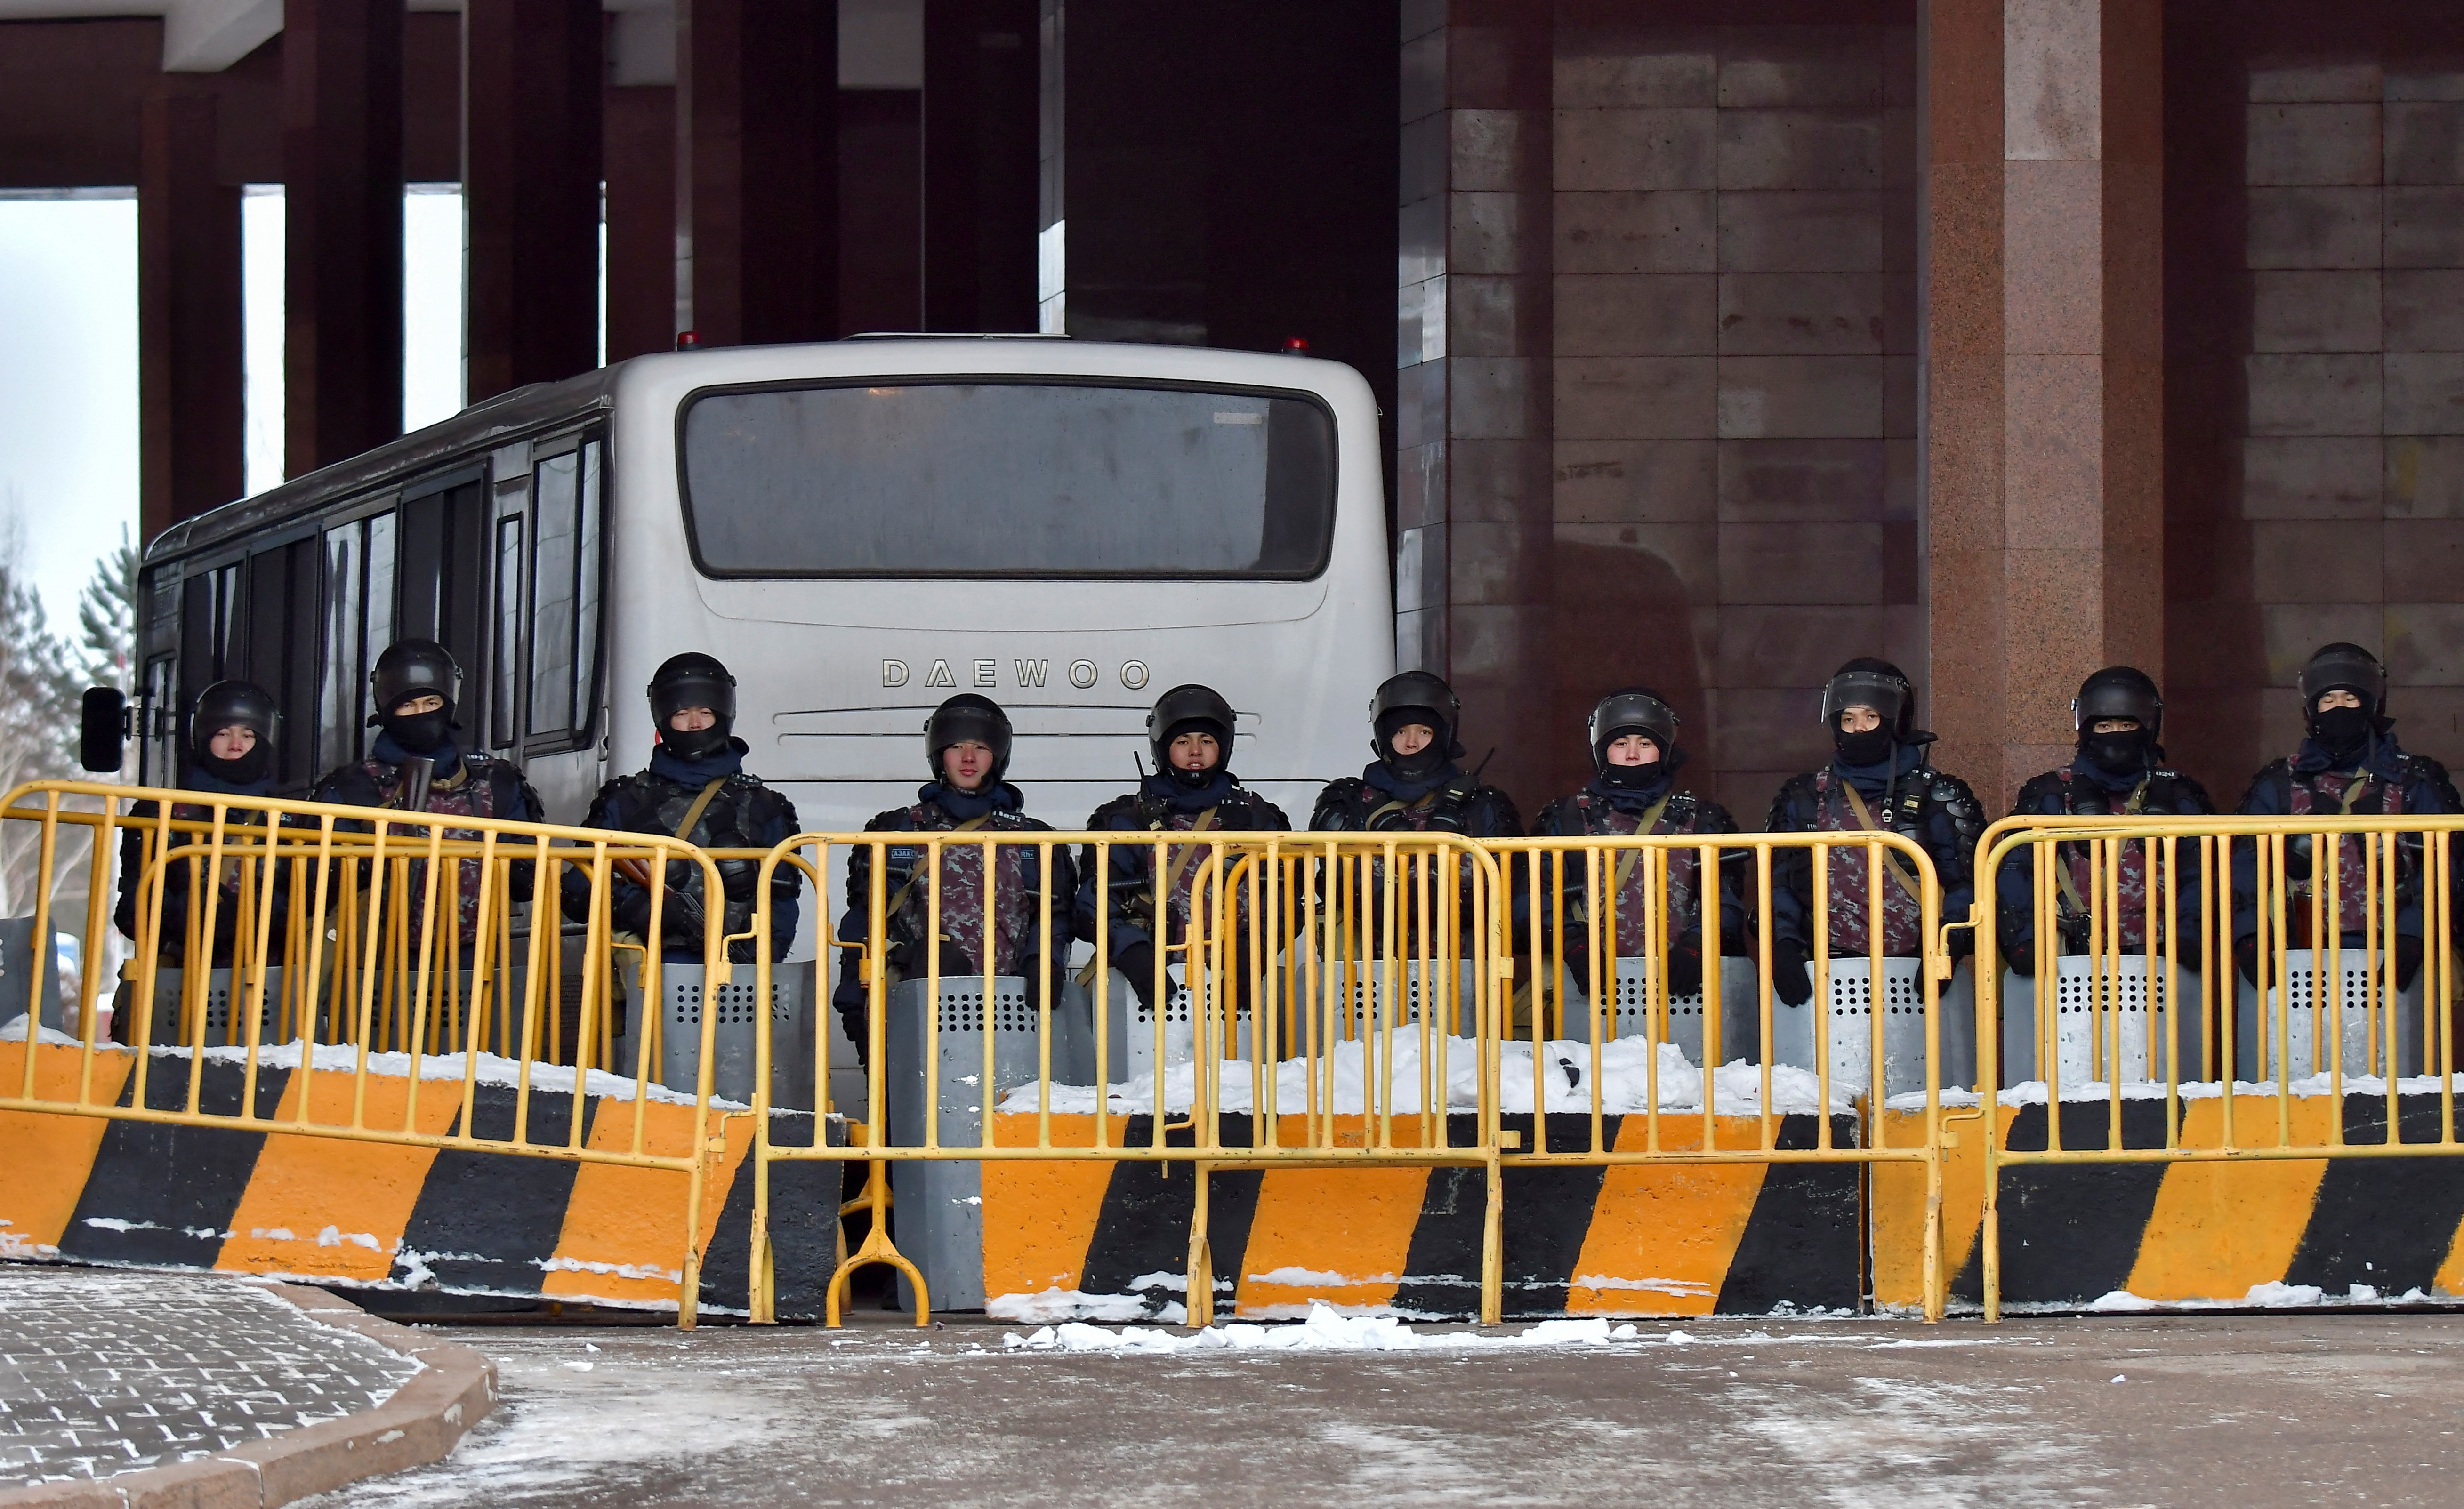 Kazakh law enforcement officers block a street leading to the official presidential residence Akorda after protests against the government, following authorities' decision to lift price caps on liquefied petroleum gas, in Nur-Sultan, Kazakhstan, January 6, 2022. REUTERS/Turar Kazangapov 